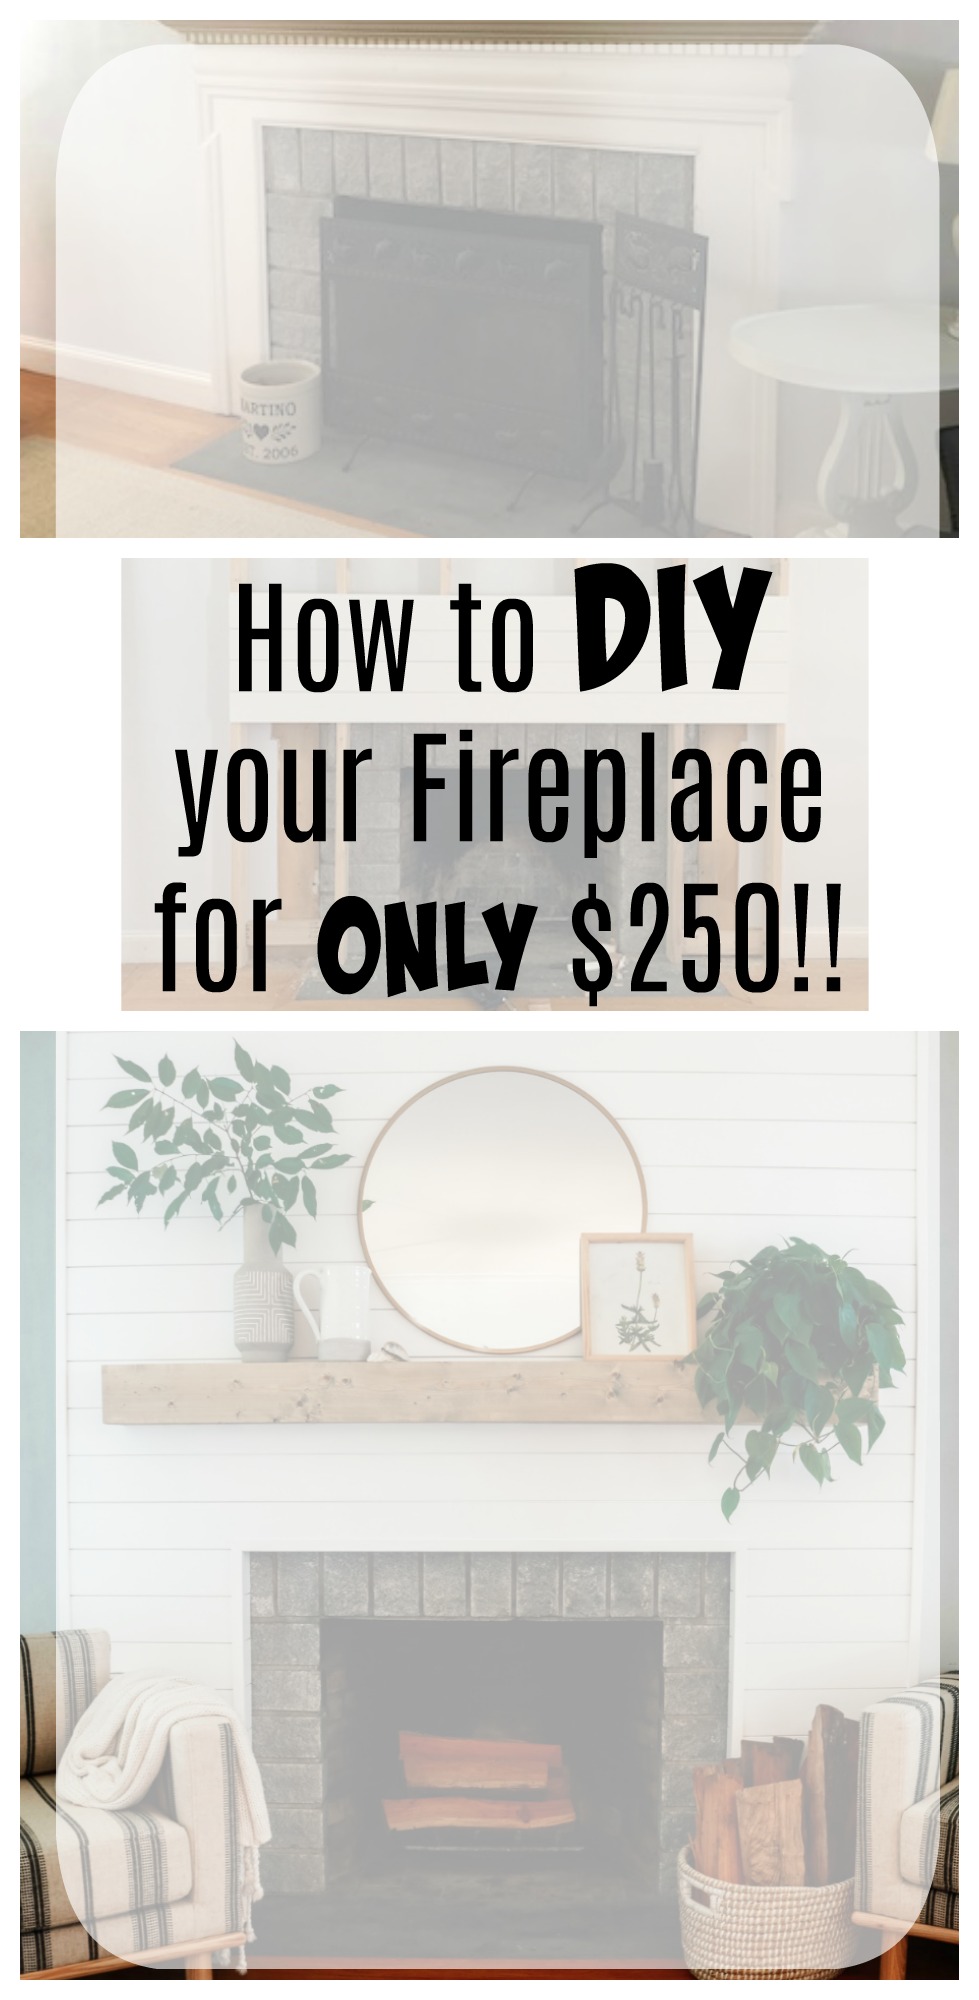 Wooden Fireplace Mantel Shelf Luxury Shiplap Fireplace and Diy Mantle Ditched the Old